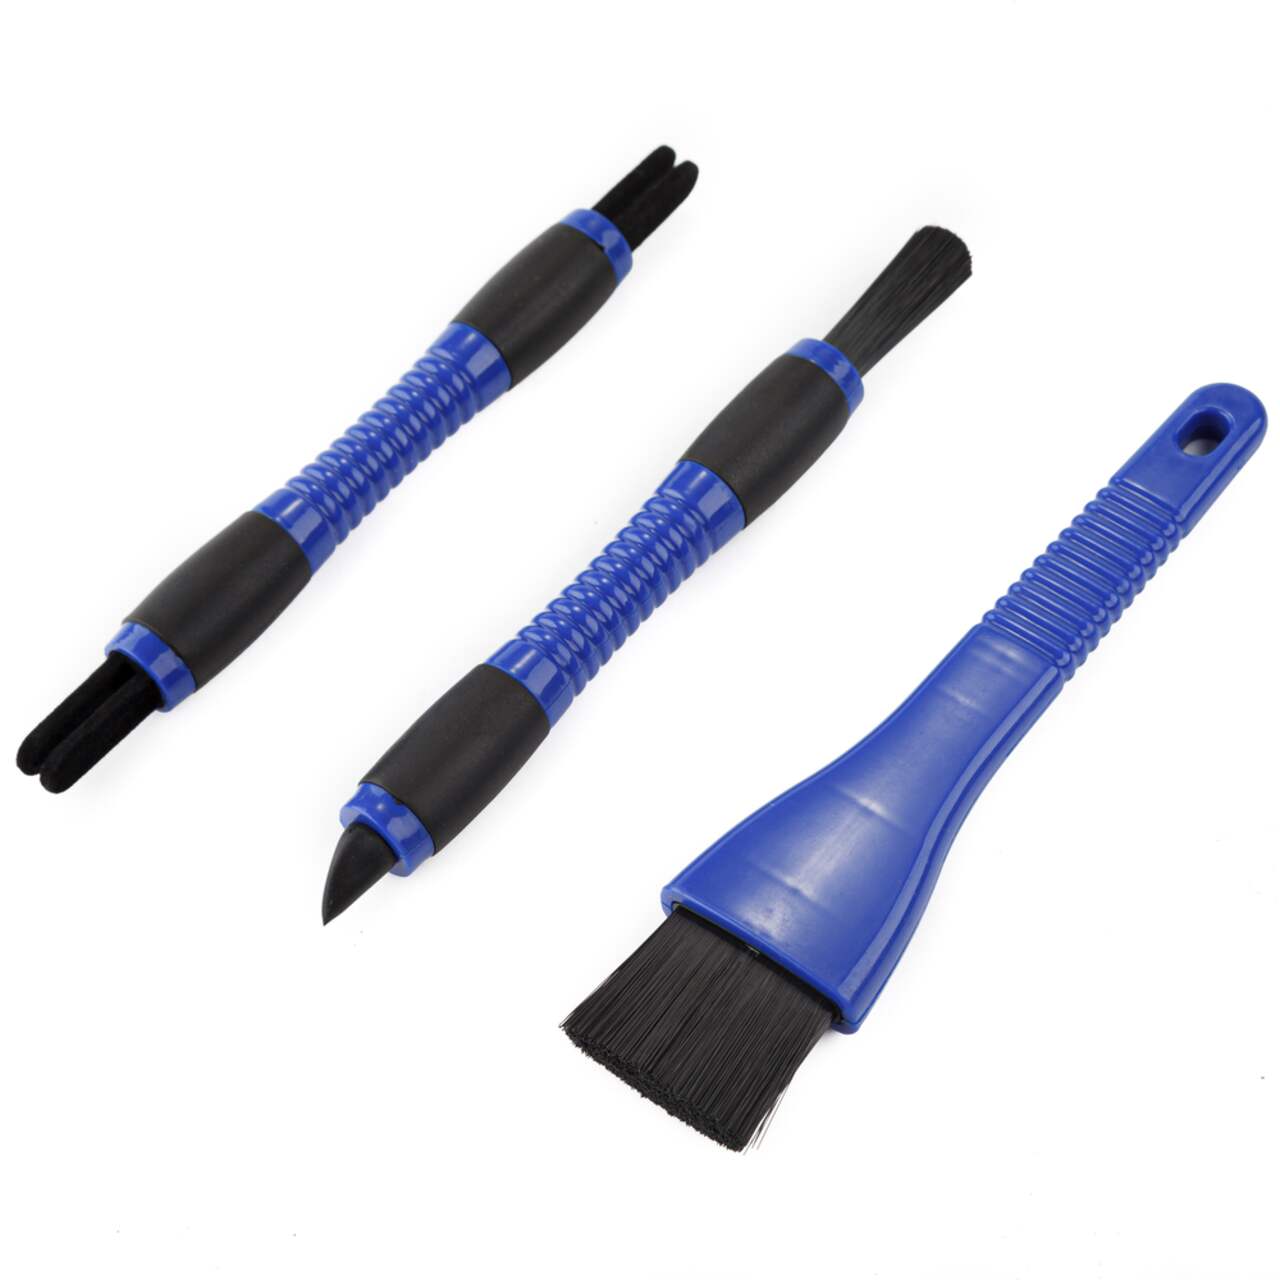 https://media-www.canadiantire.ca/product/automotive/car-care-accessories/auto-cleaning-tools/0393646/simoniz-cleaning-brushes-3pk-f4757b65-c7b9-47d0-8555-4f14cac9e3a4.png?imdensity=1&imwidth=640&impolicy=mZoom